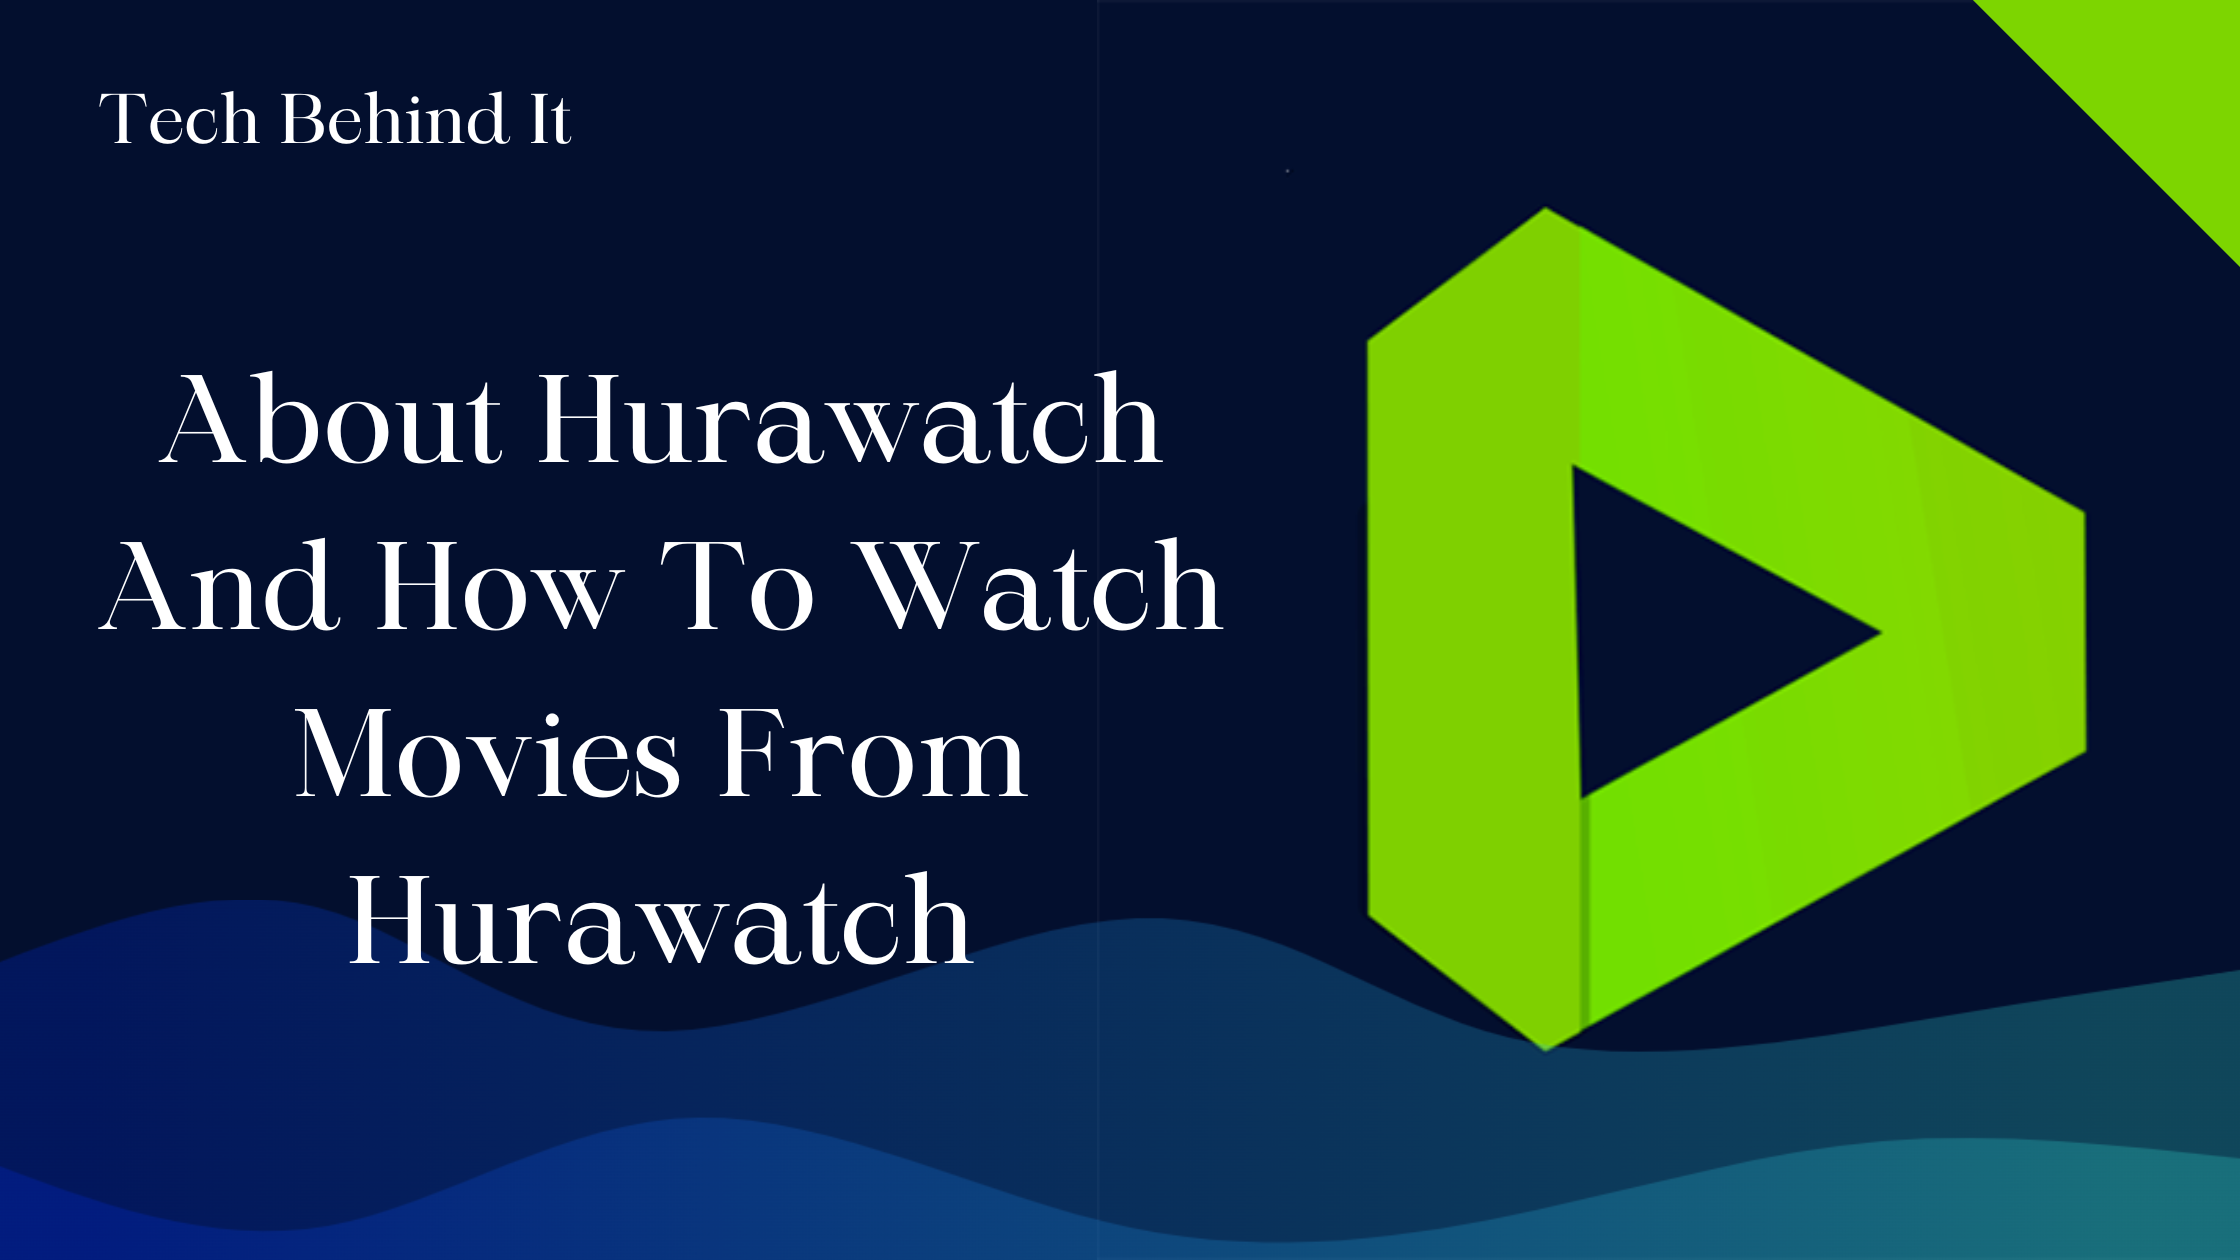 About Hurawatch And How To Watch Movies From Hurawatch